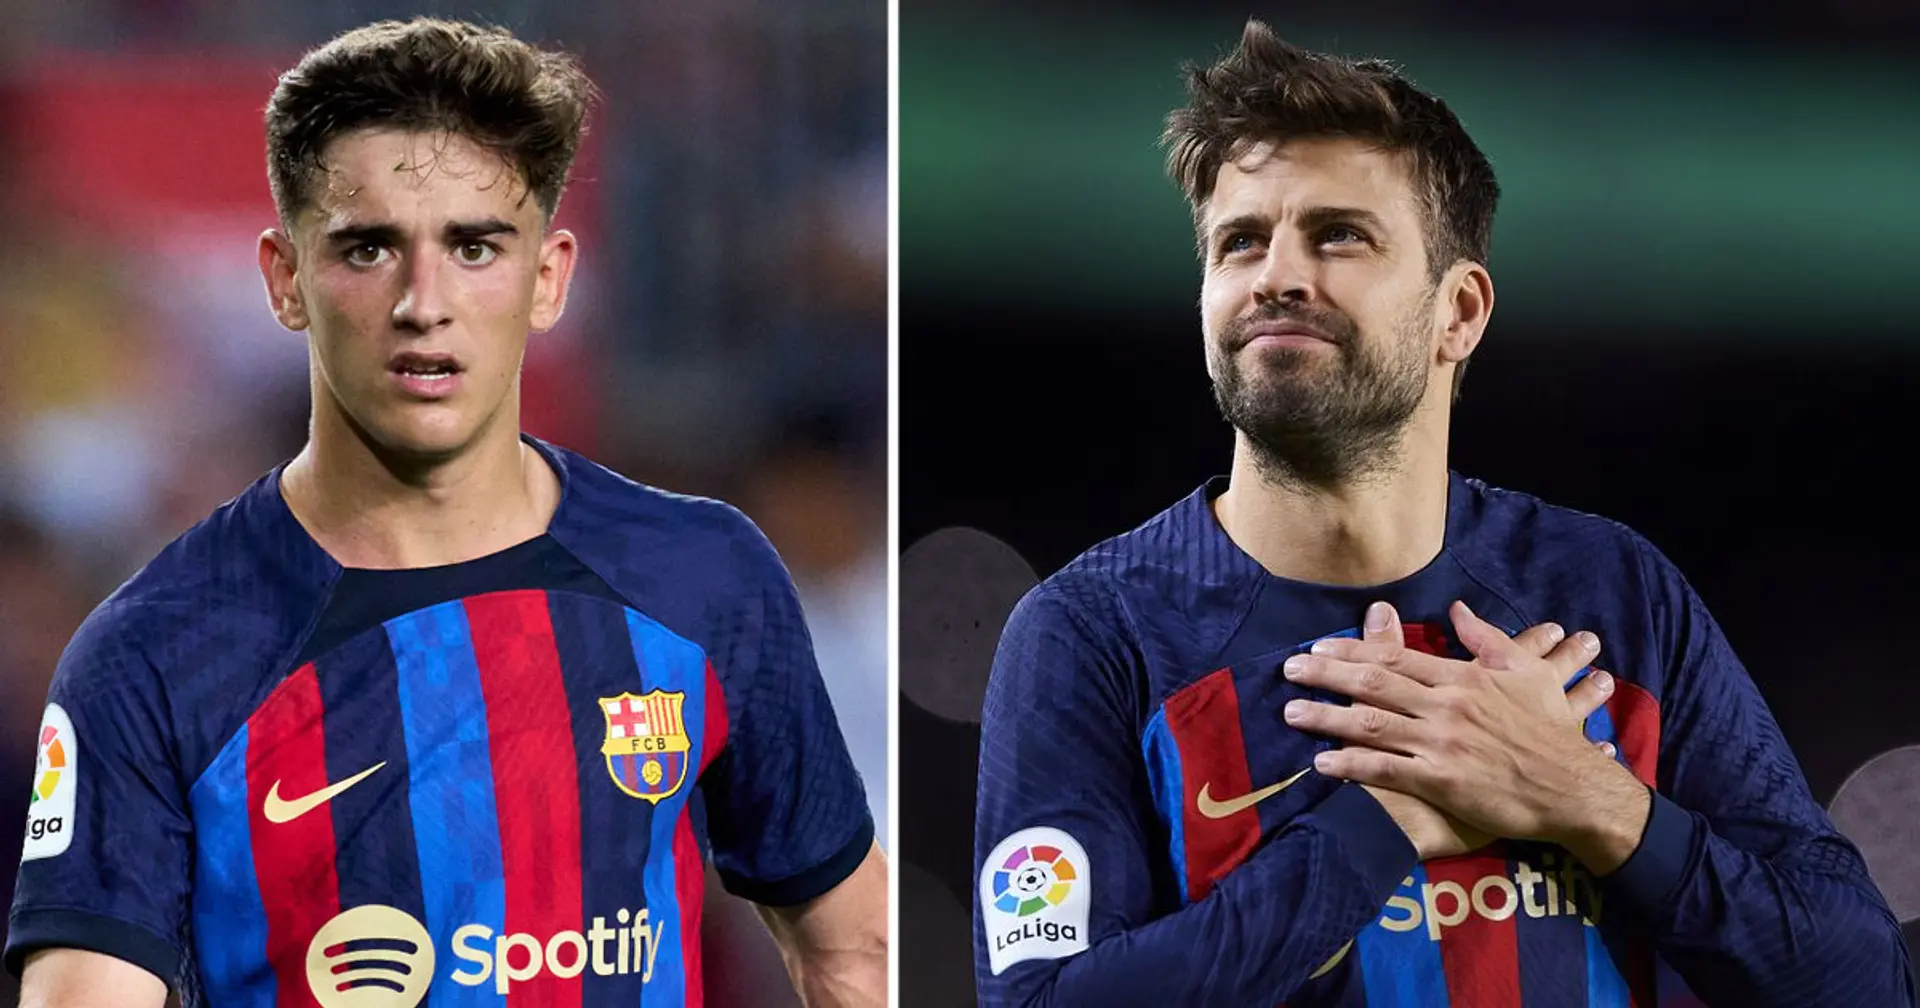 Pique's retirement to allow Barca to promote 3 youngsters to first team